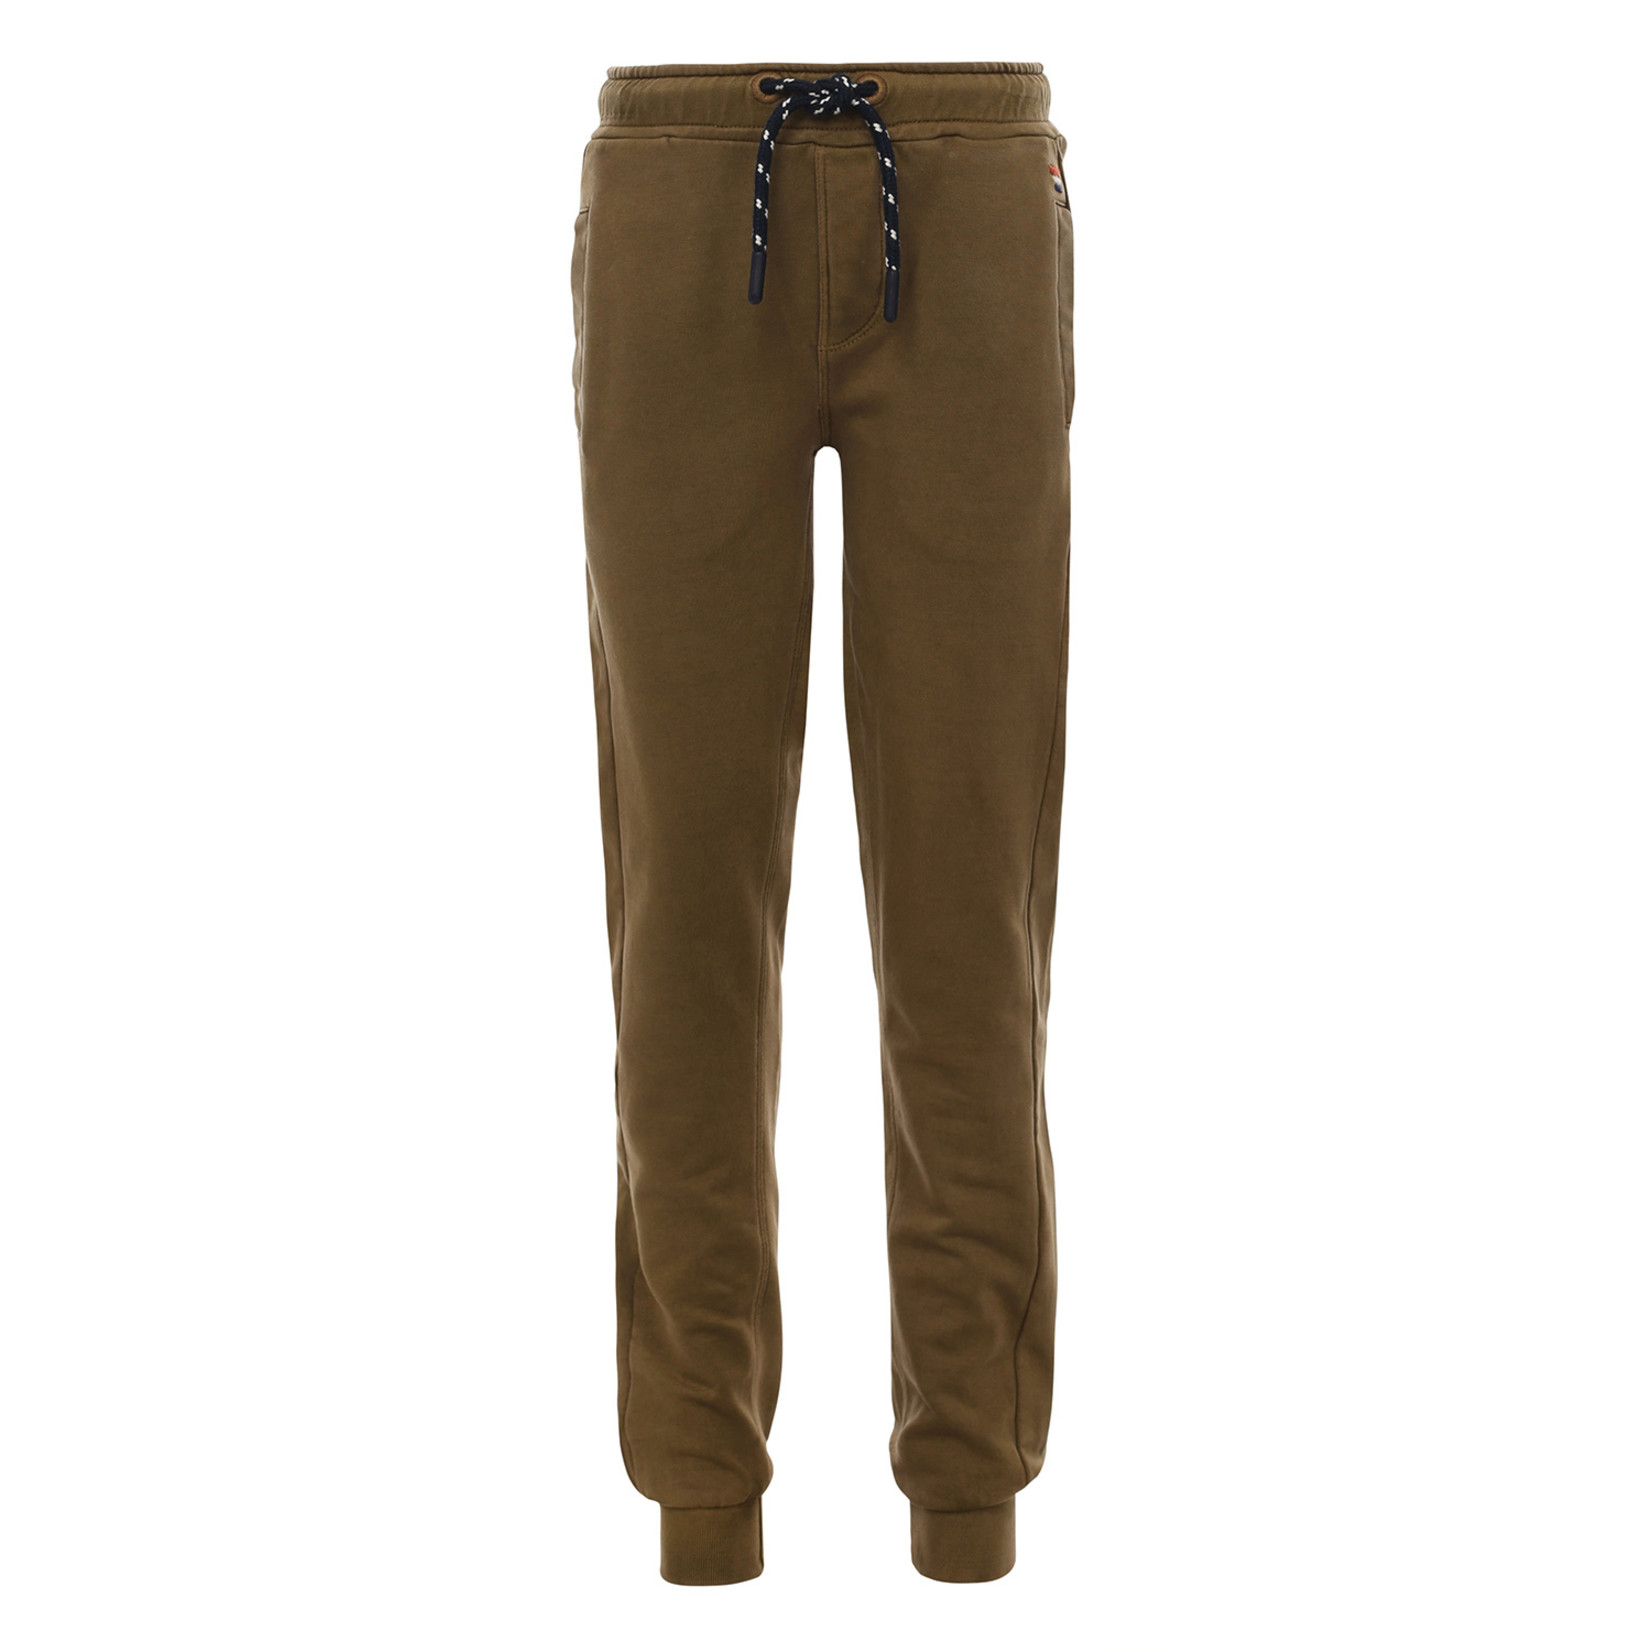 Common Heroes Common Heroes Garment dyed pants Moss green